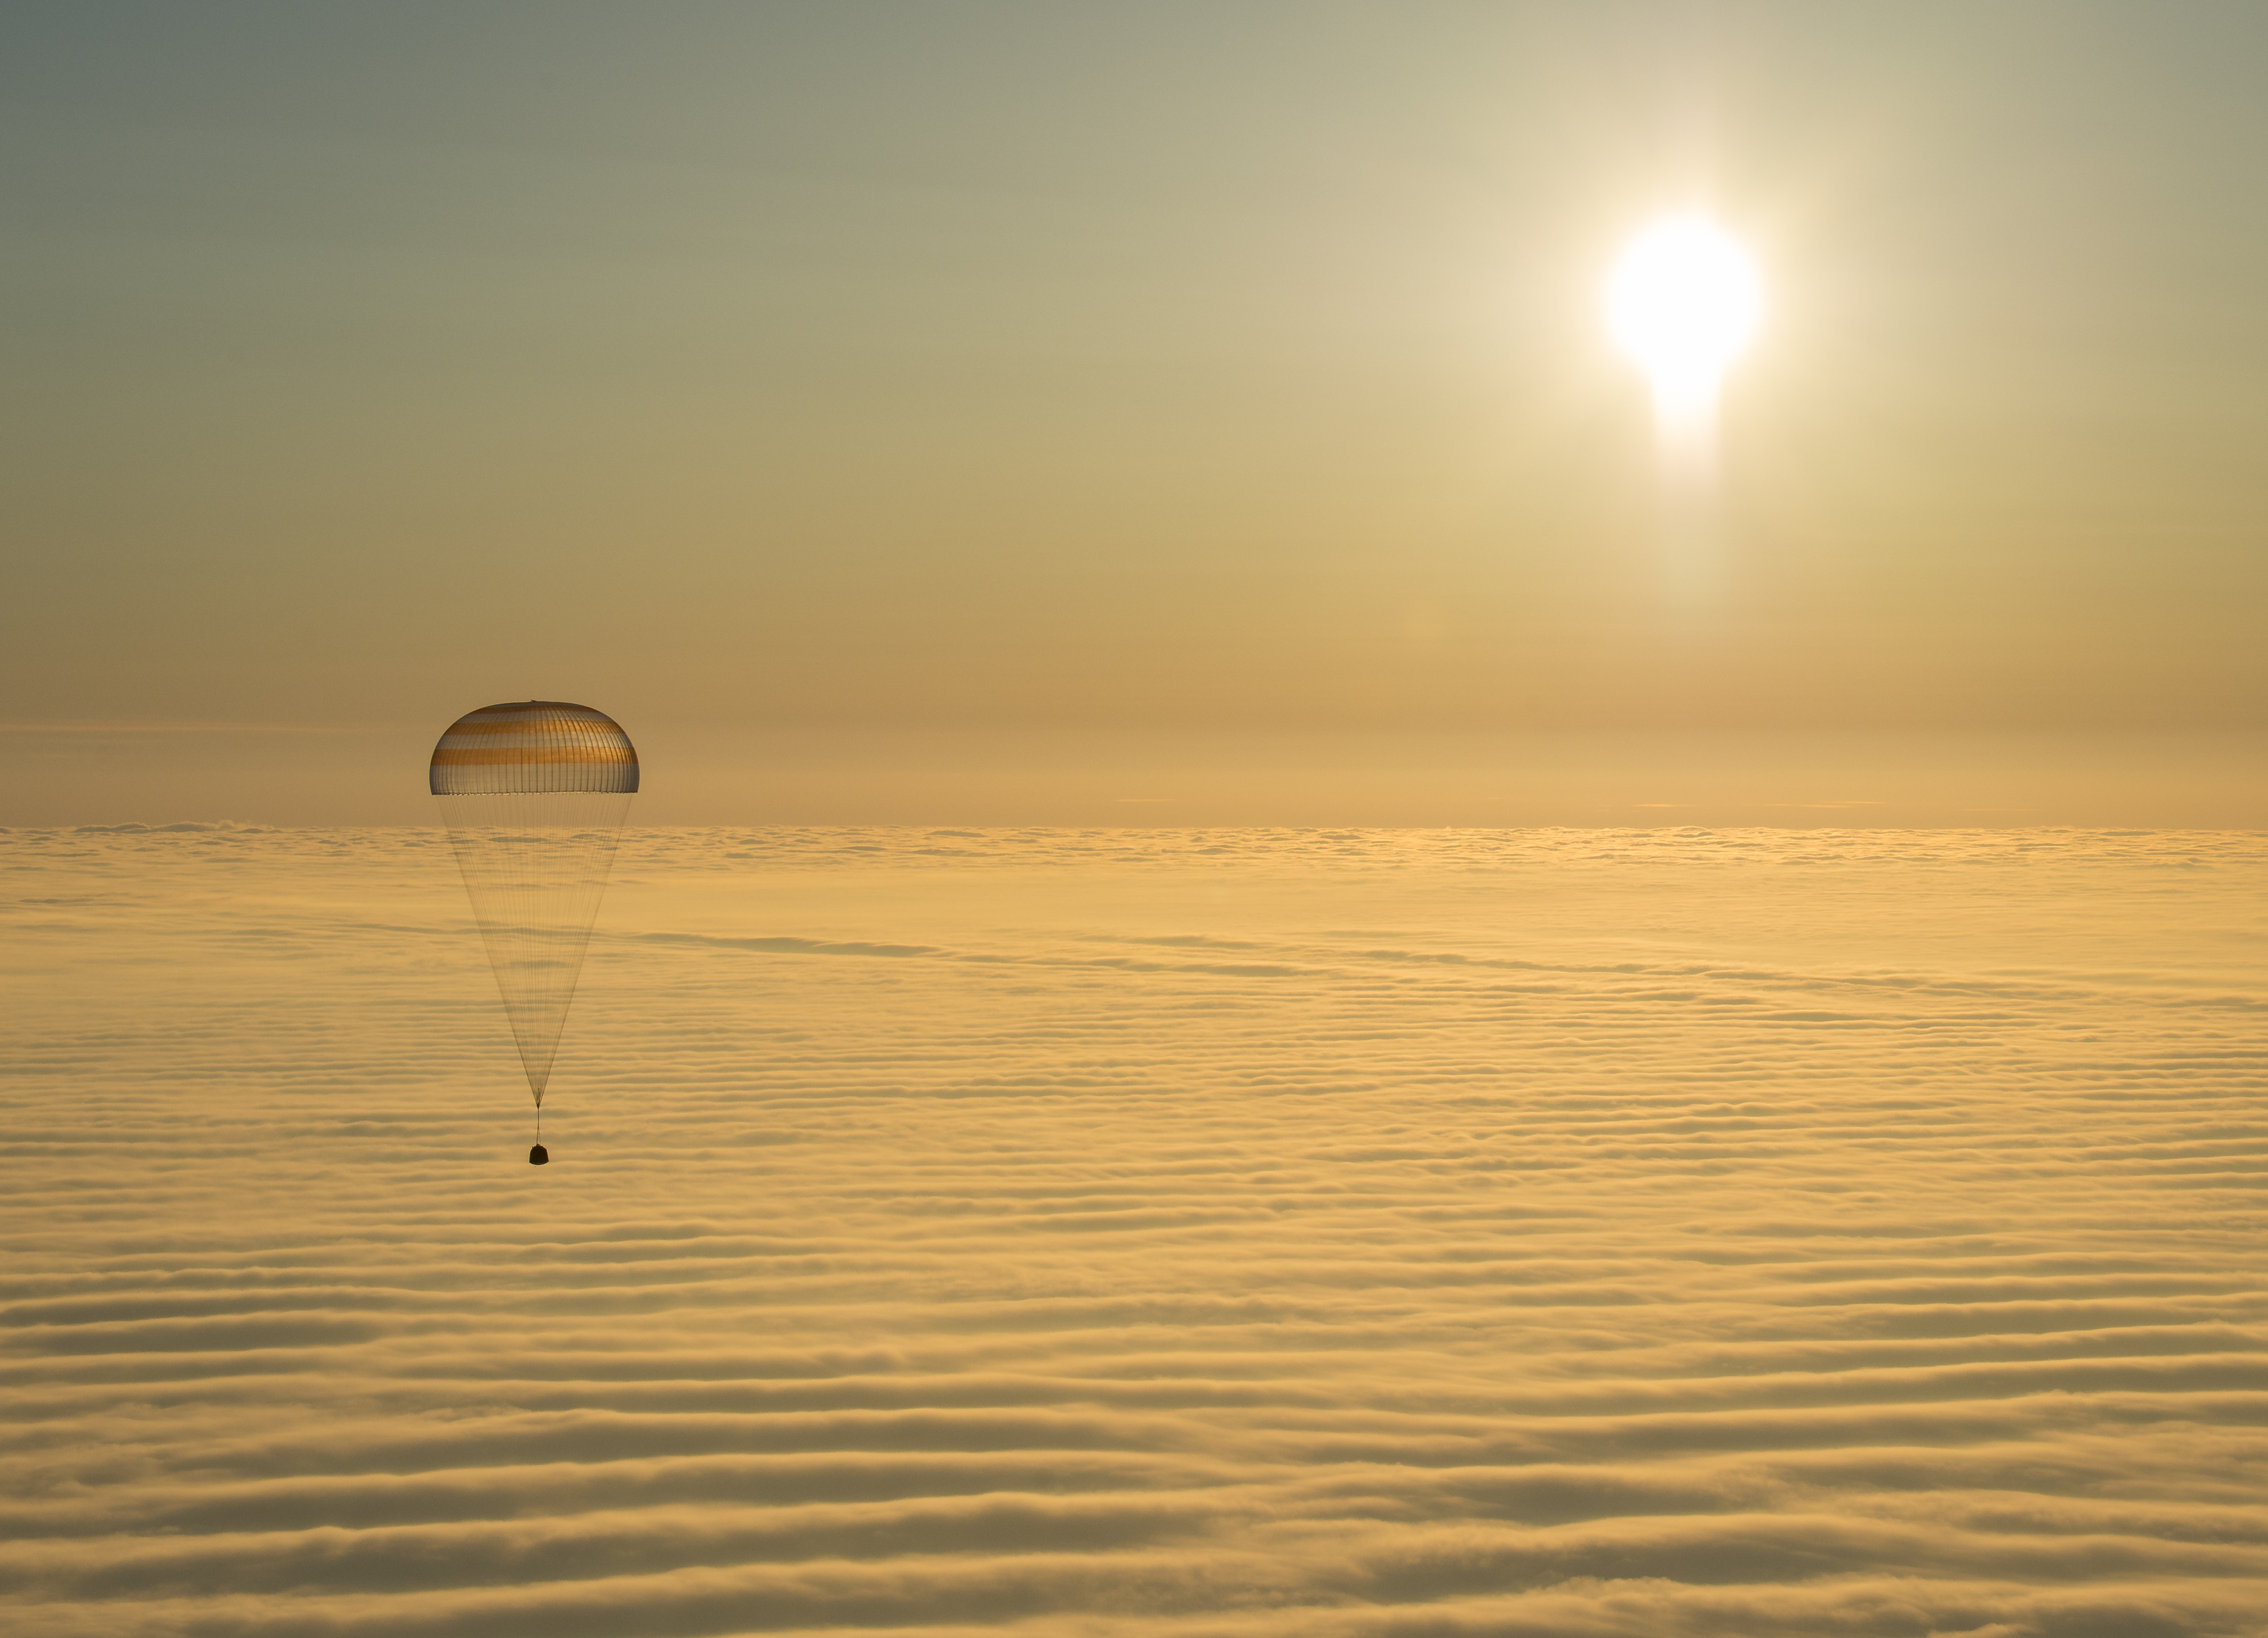 On March 12, 2015, shortly after local sunrise over central Asia, this Soyuz TMA-14M spacecraft floated over a sea of golden clouds during its descent by parachute through planet Earth's dense atmosphere. On board were Expedition 42 commander Barry Wilmore of NASA and Alexander Samokutyaev and Elena Serova of the Russian Federal Space Agency (Roscosmos). Touch down was at approximately 10:07 p.m. EDT (8:07 a.m. March 12, Kazakh time) southeast of Zhezkazgan, Kazakhstan. The three were returning from low Earth orbit, after almost six months on the International Space Station as members of the Expedition 41 and Expedition 42 crews